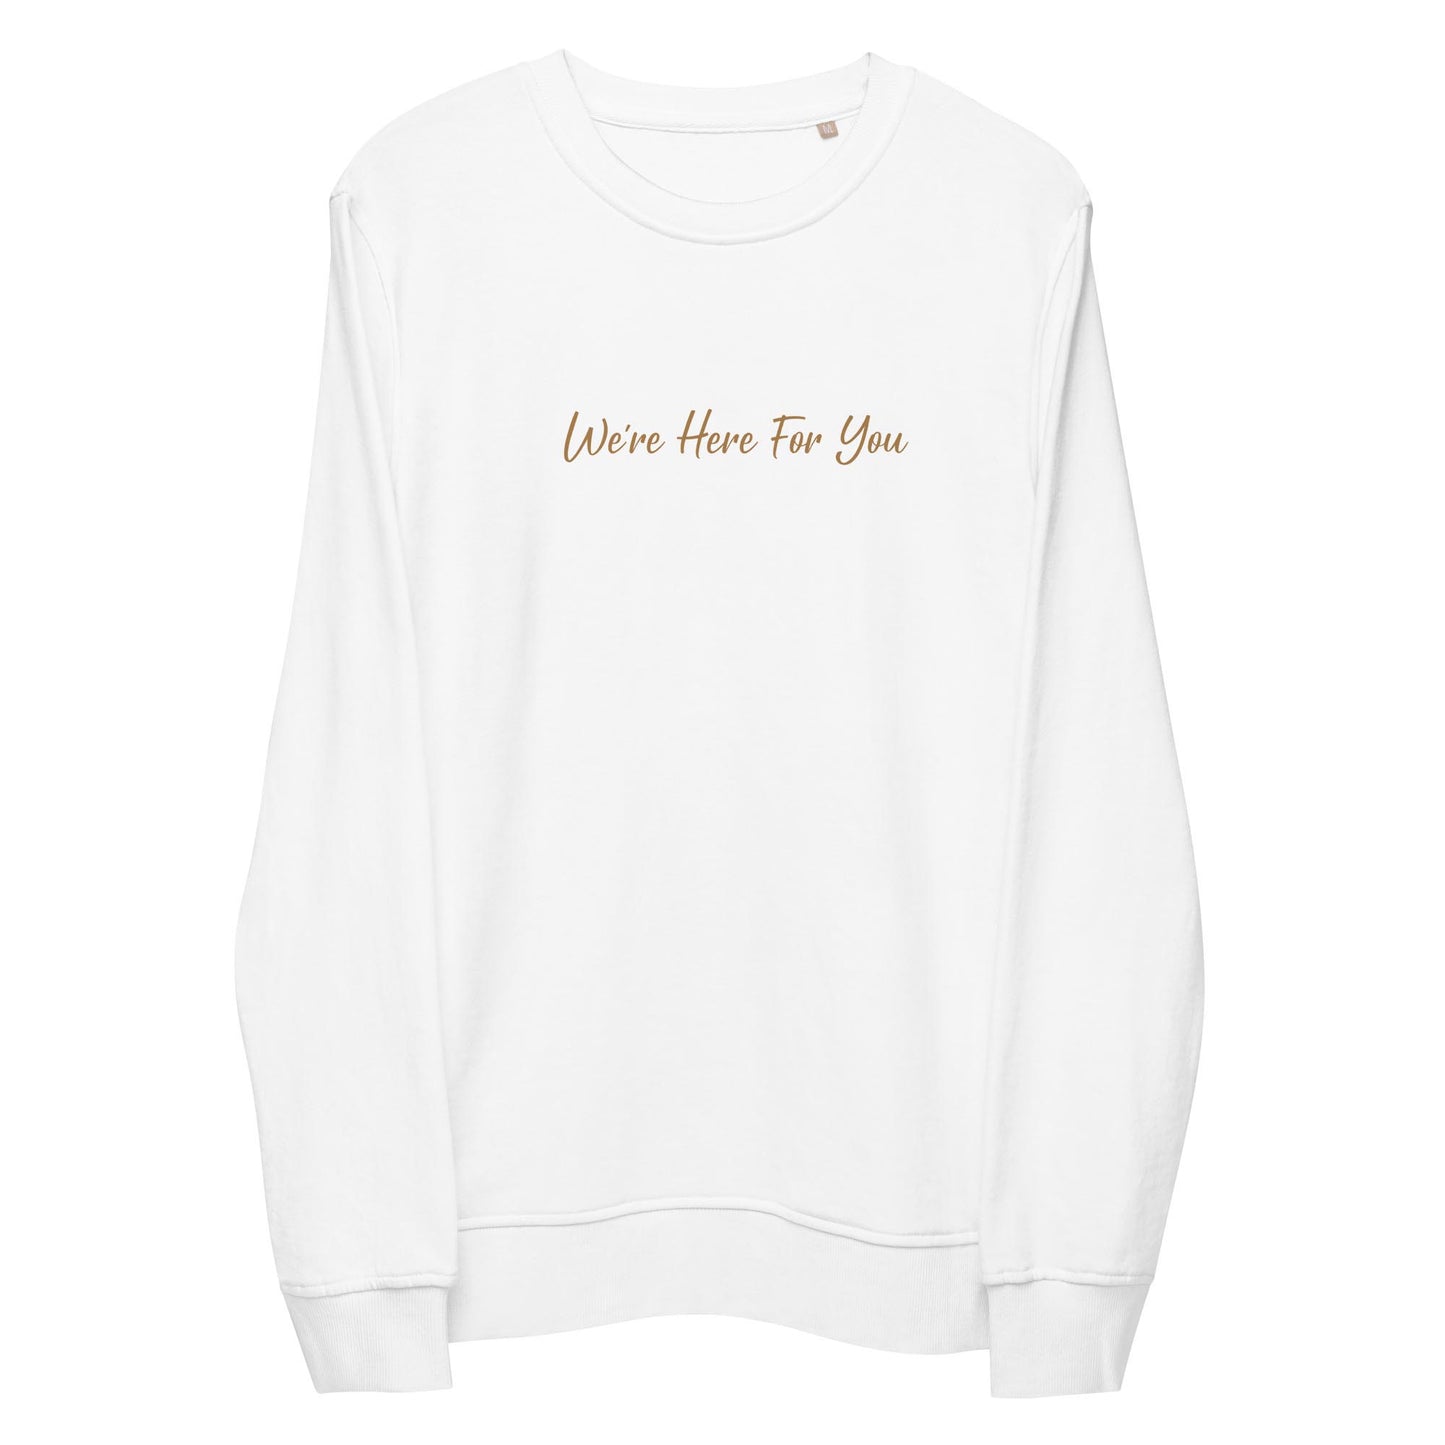 Women white positive sweatshirt with inspirational quote, "We Are Here For You."